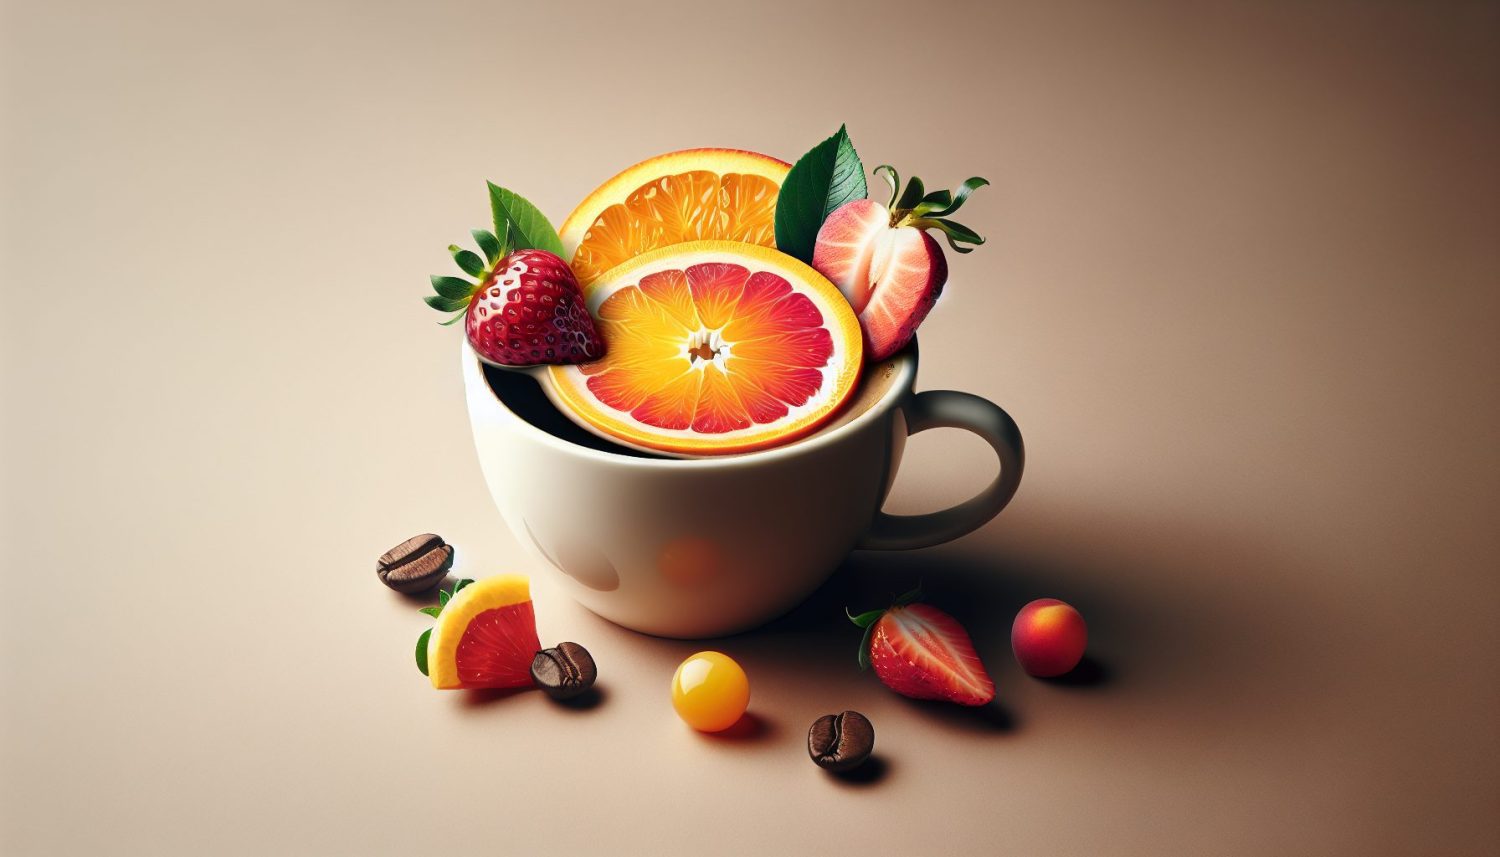 Punch Up Your Daily Cup With Fruit Flavored Coffee